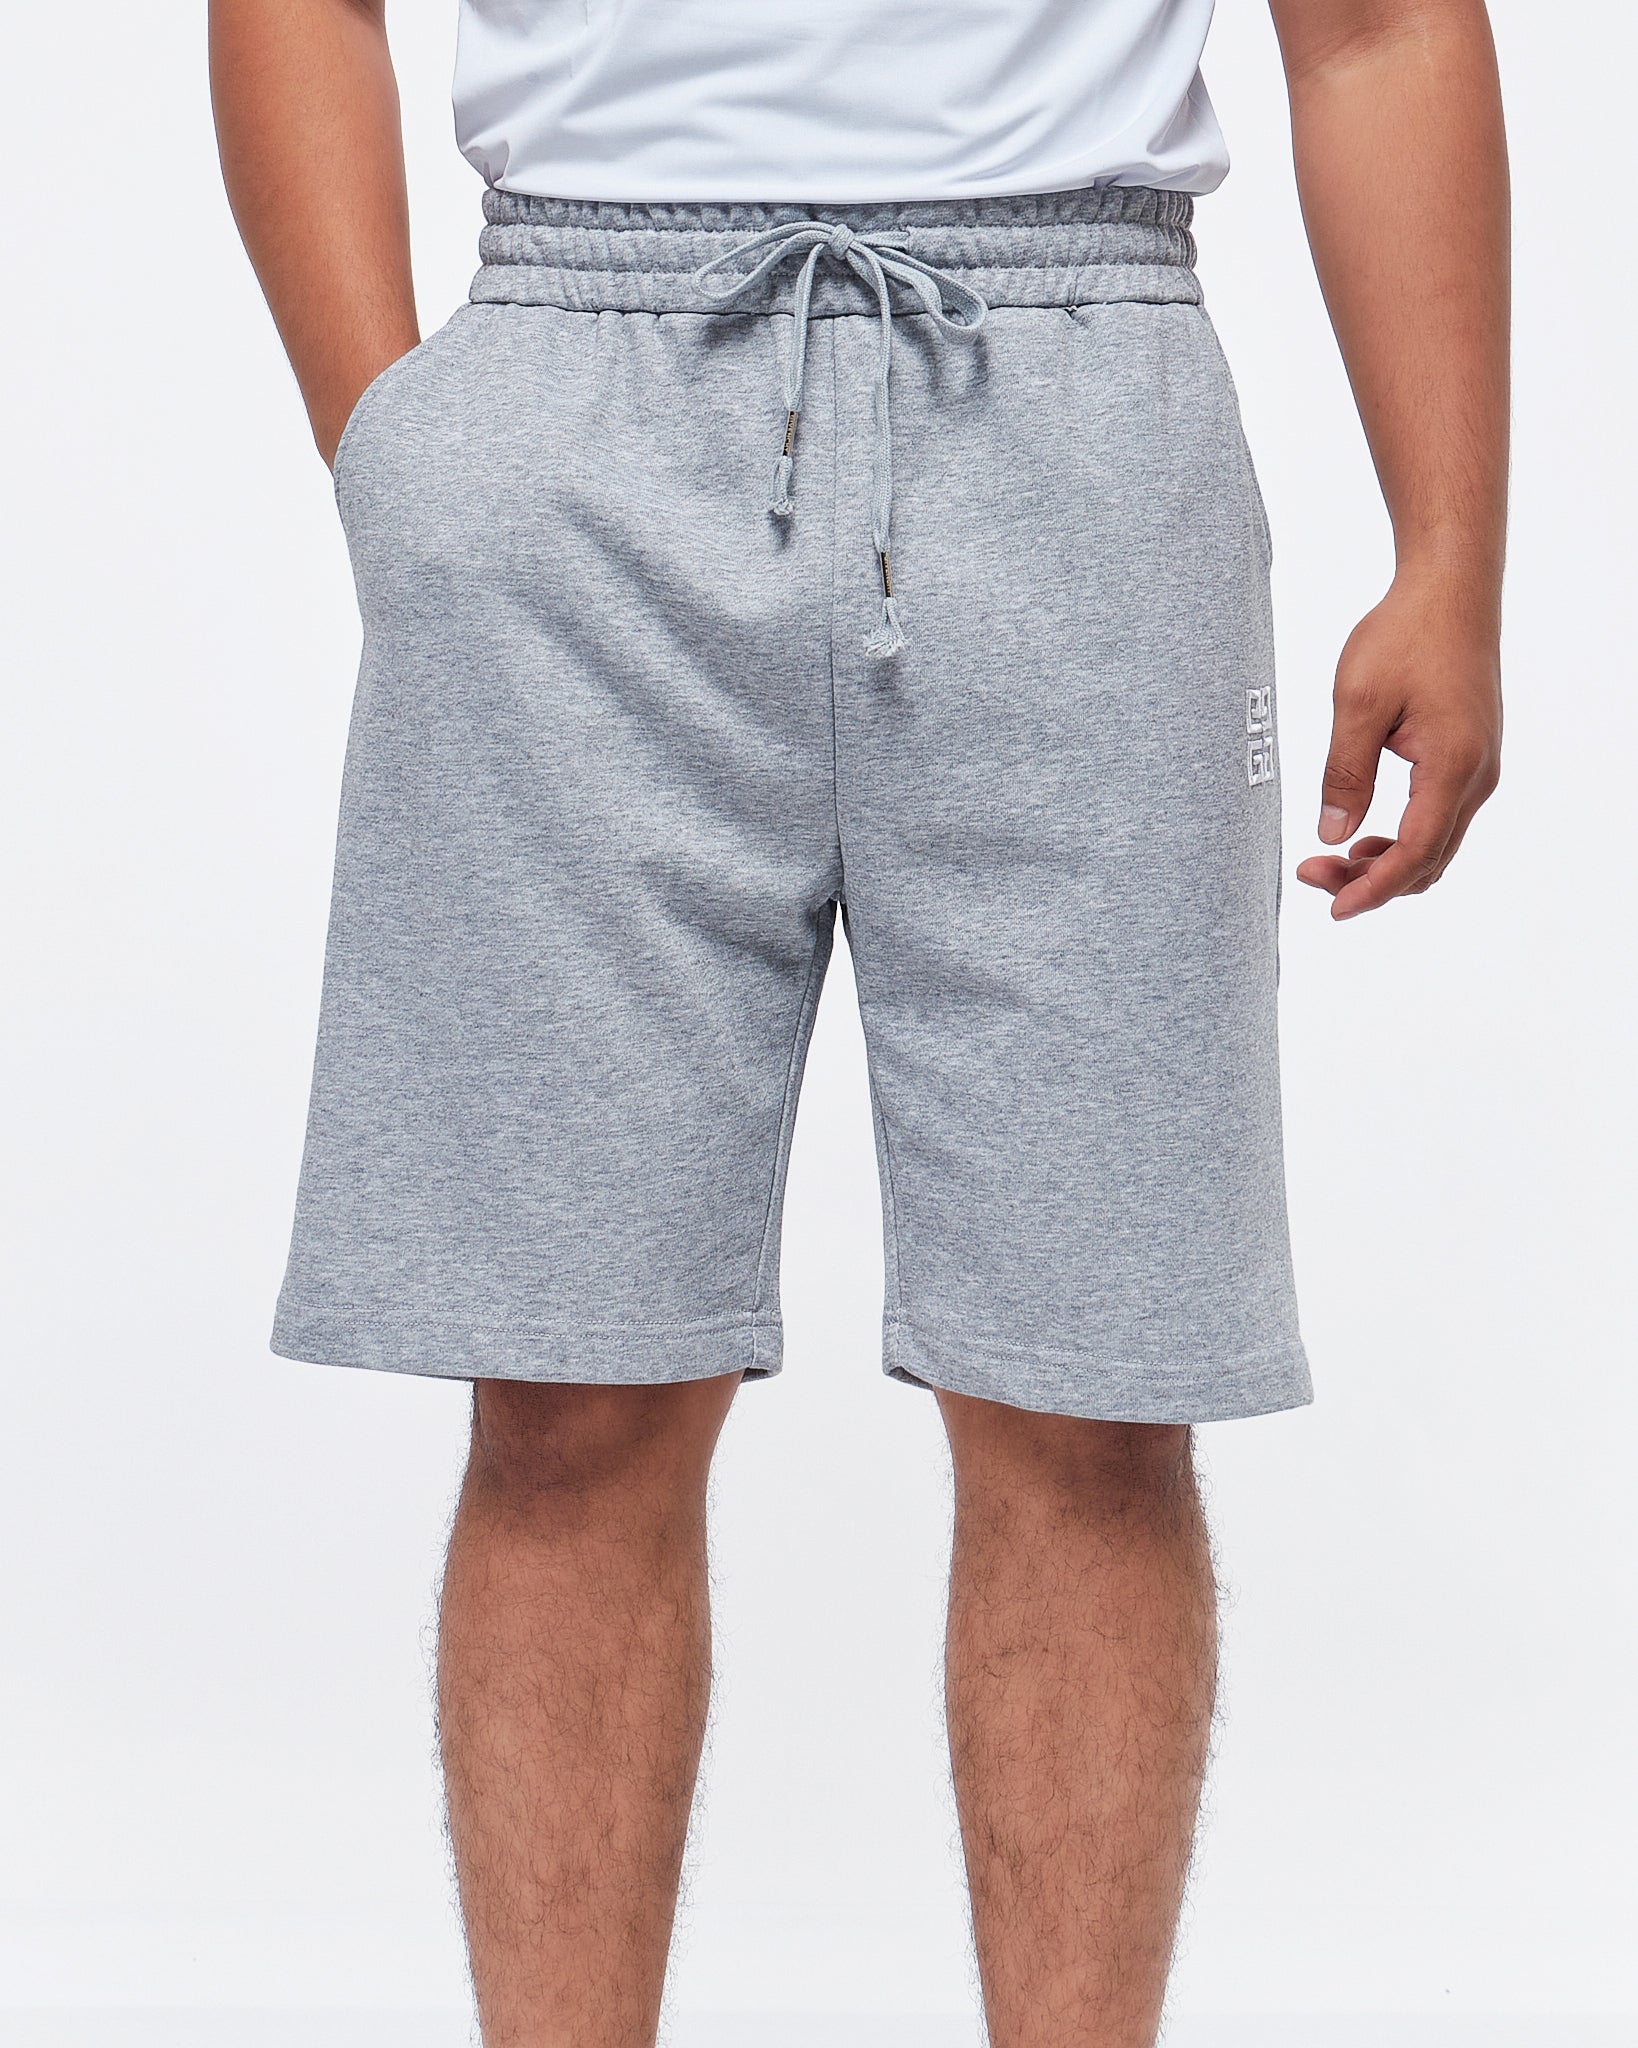 MOI OUTFIT-Givenchy Embroidered Men Shorts 19.90